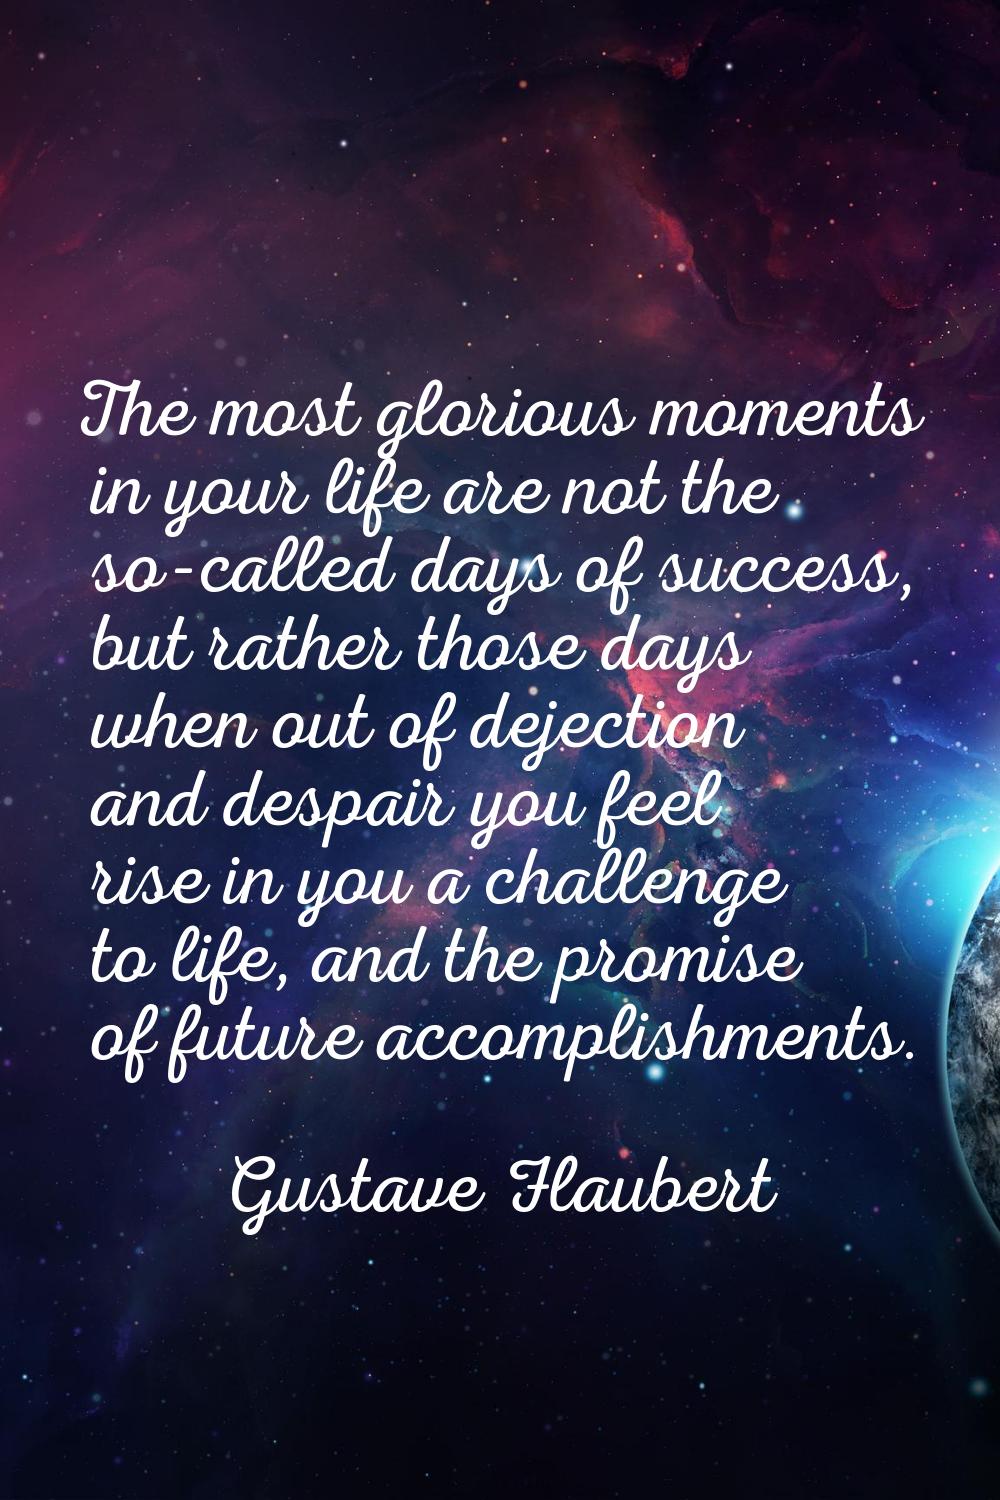 The most glorious moments in your life are not the so-called days of success, but rather those days